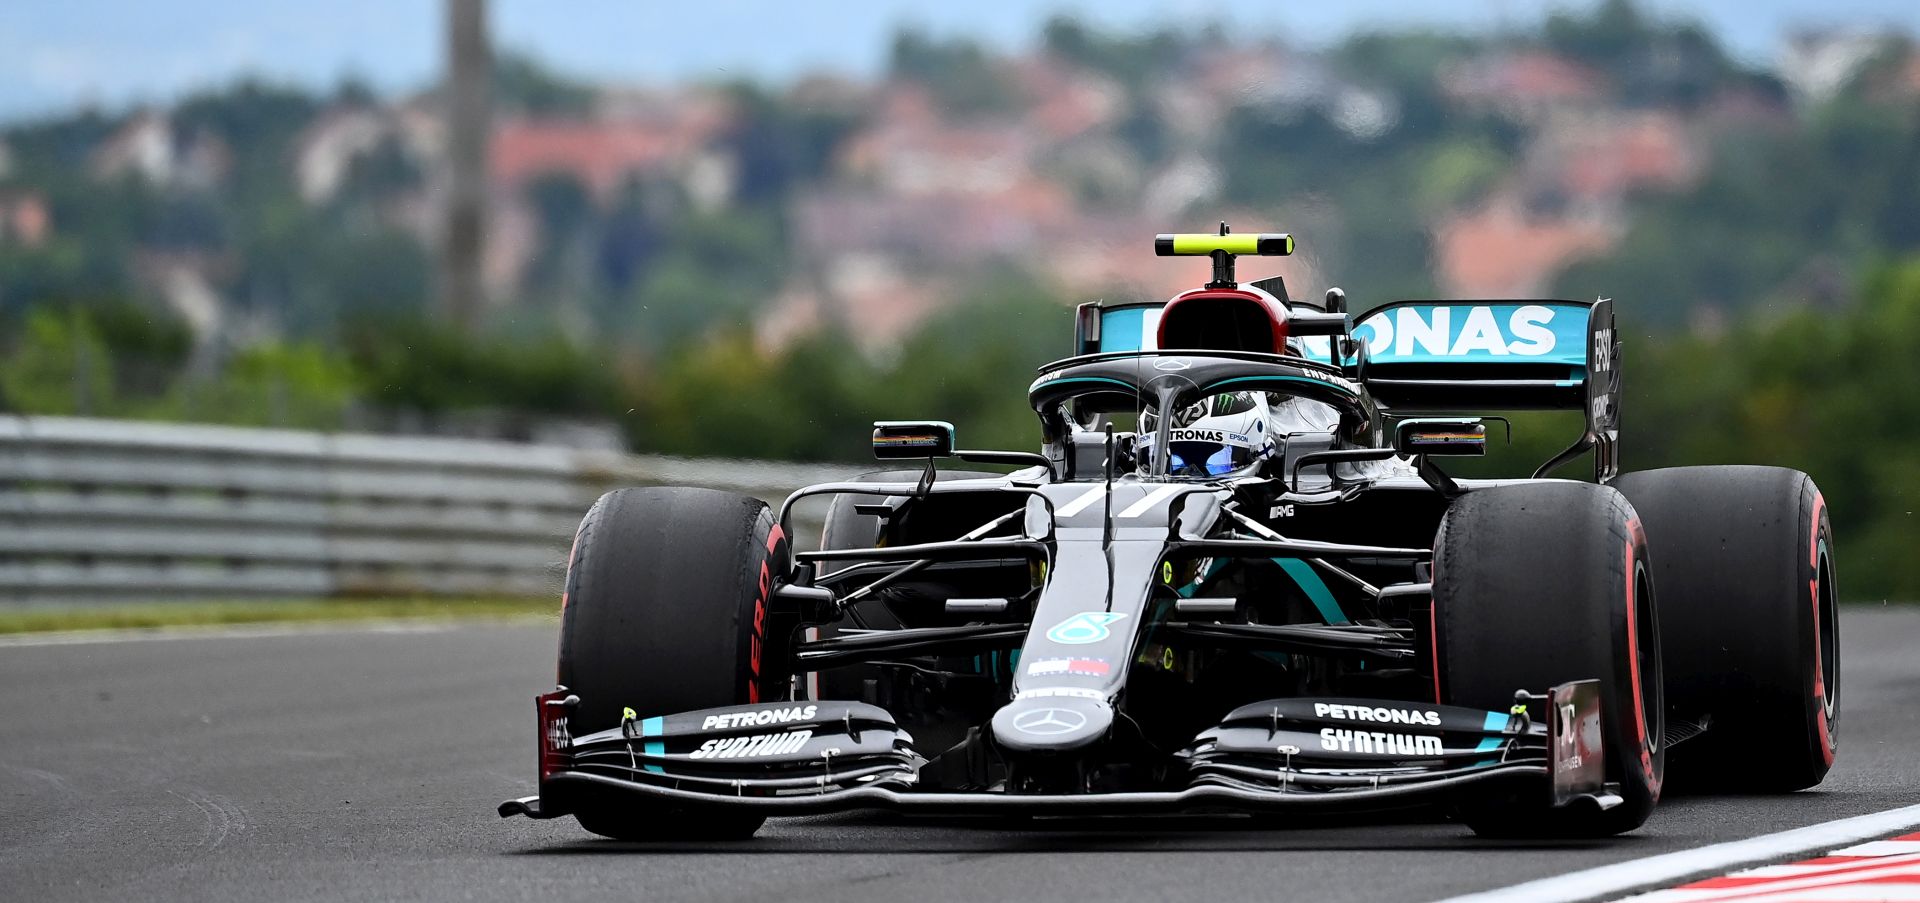 epa08551814 A handout photo made available by the FIA shows Finnish Formula One driver Valtteri Bottas of Mercedes AMG GP in action during the first practice session for the Formula One Grand Prix of Hungary in Mogyorod, Hungary, 17 July 2020.  EPA/FIA/F1 HANDOUT  SHUTTERSTOCK OUT HANDOUT EDITORIAL USE ONLY/NO SALES